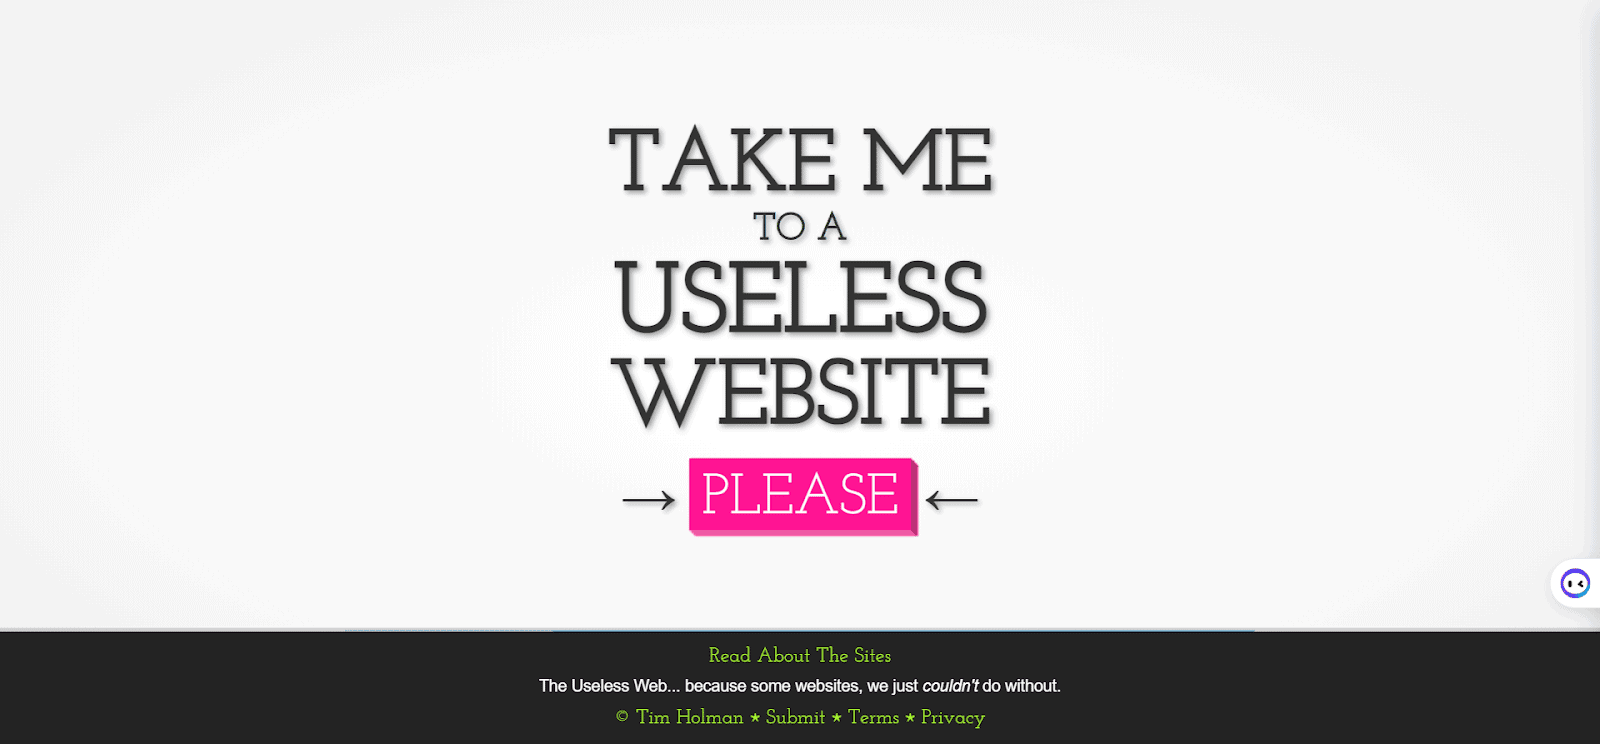 100 Weird websites to visit when bored the useless web